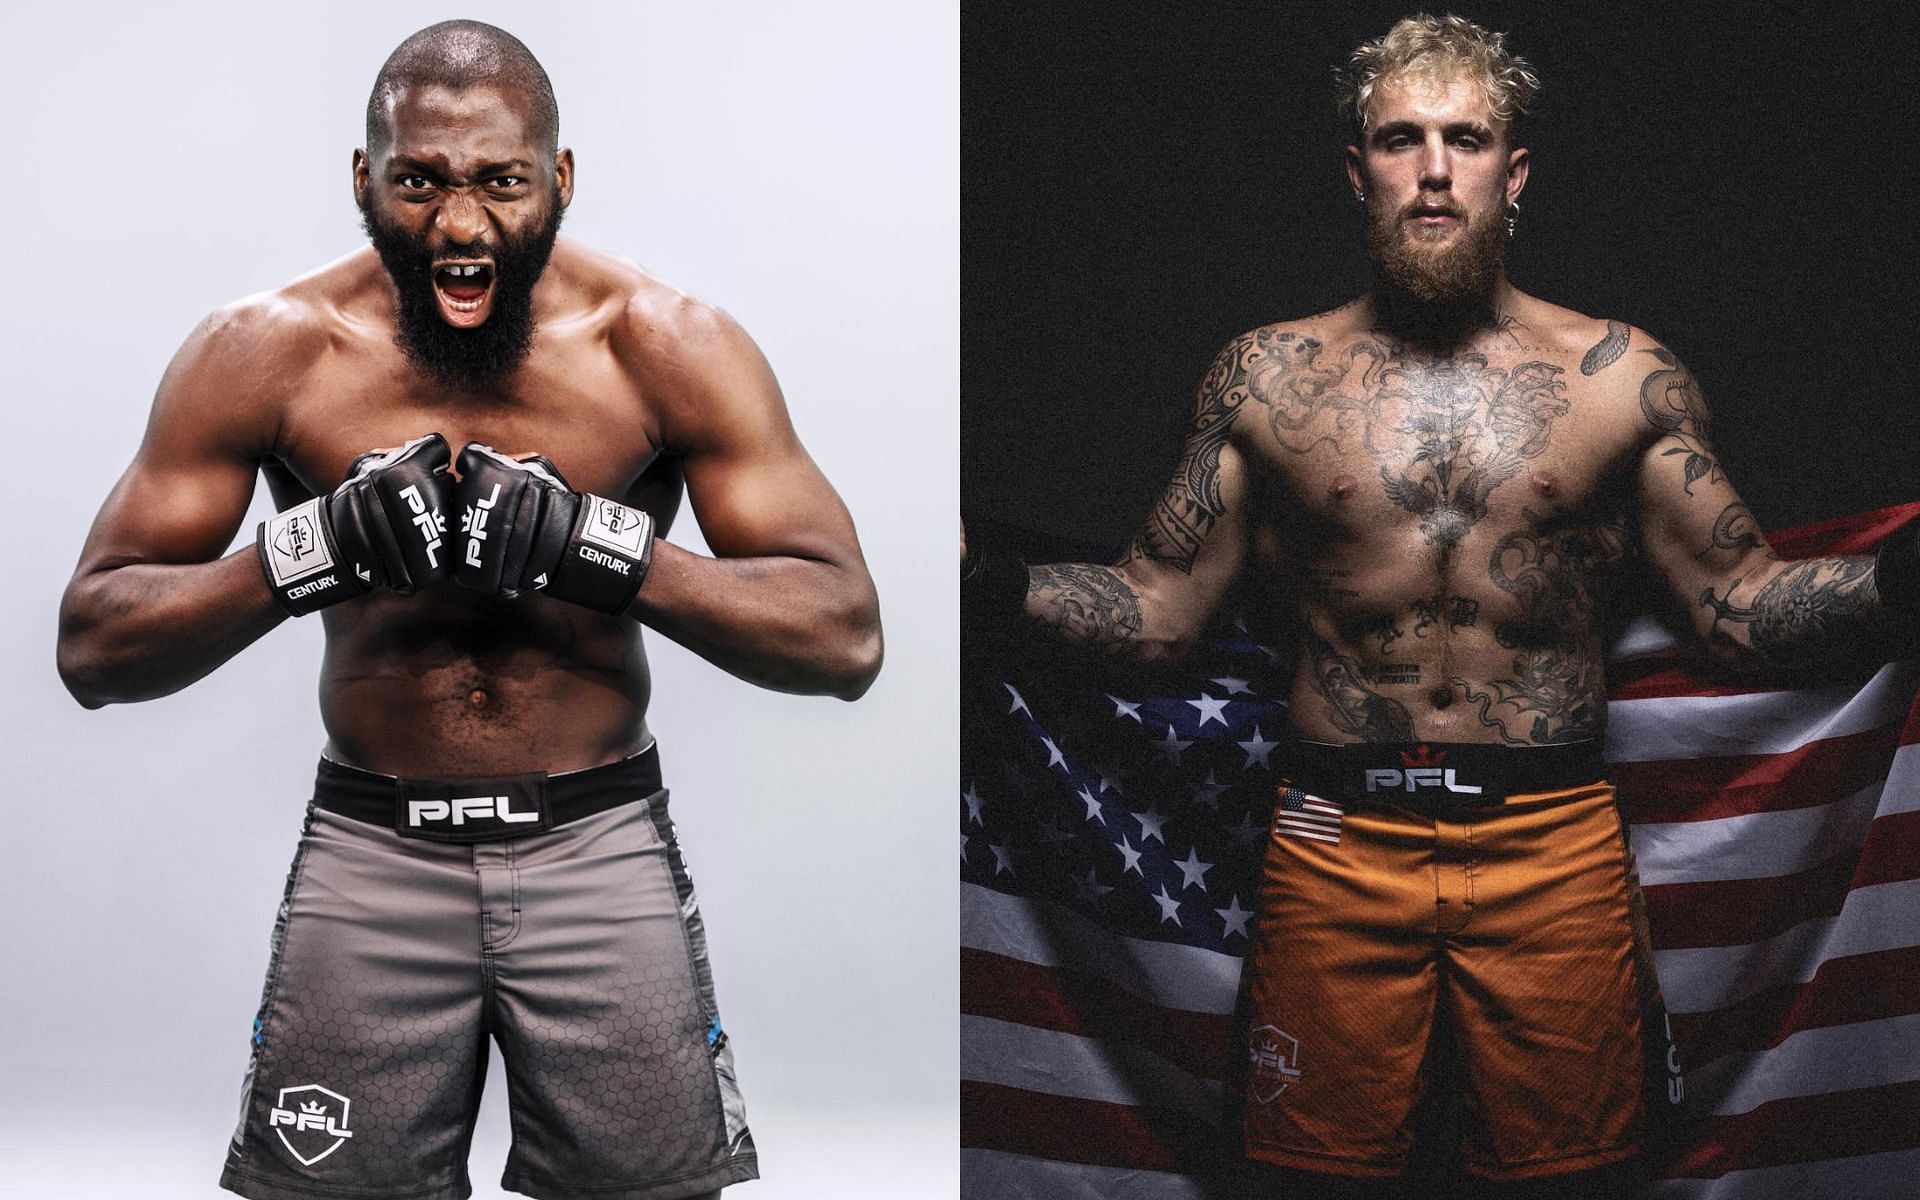 Cedric Doumbe (left) teases a future Jake Paul (right) PFL contest [Image Courtesy: @cedricdoumbe and @jakepaul on Instagram]